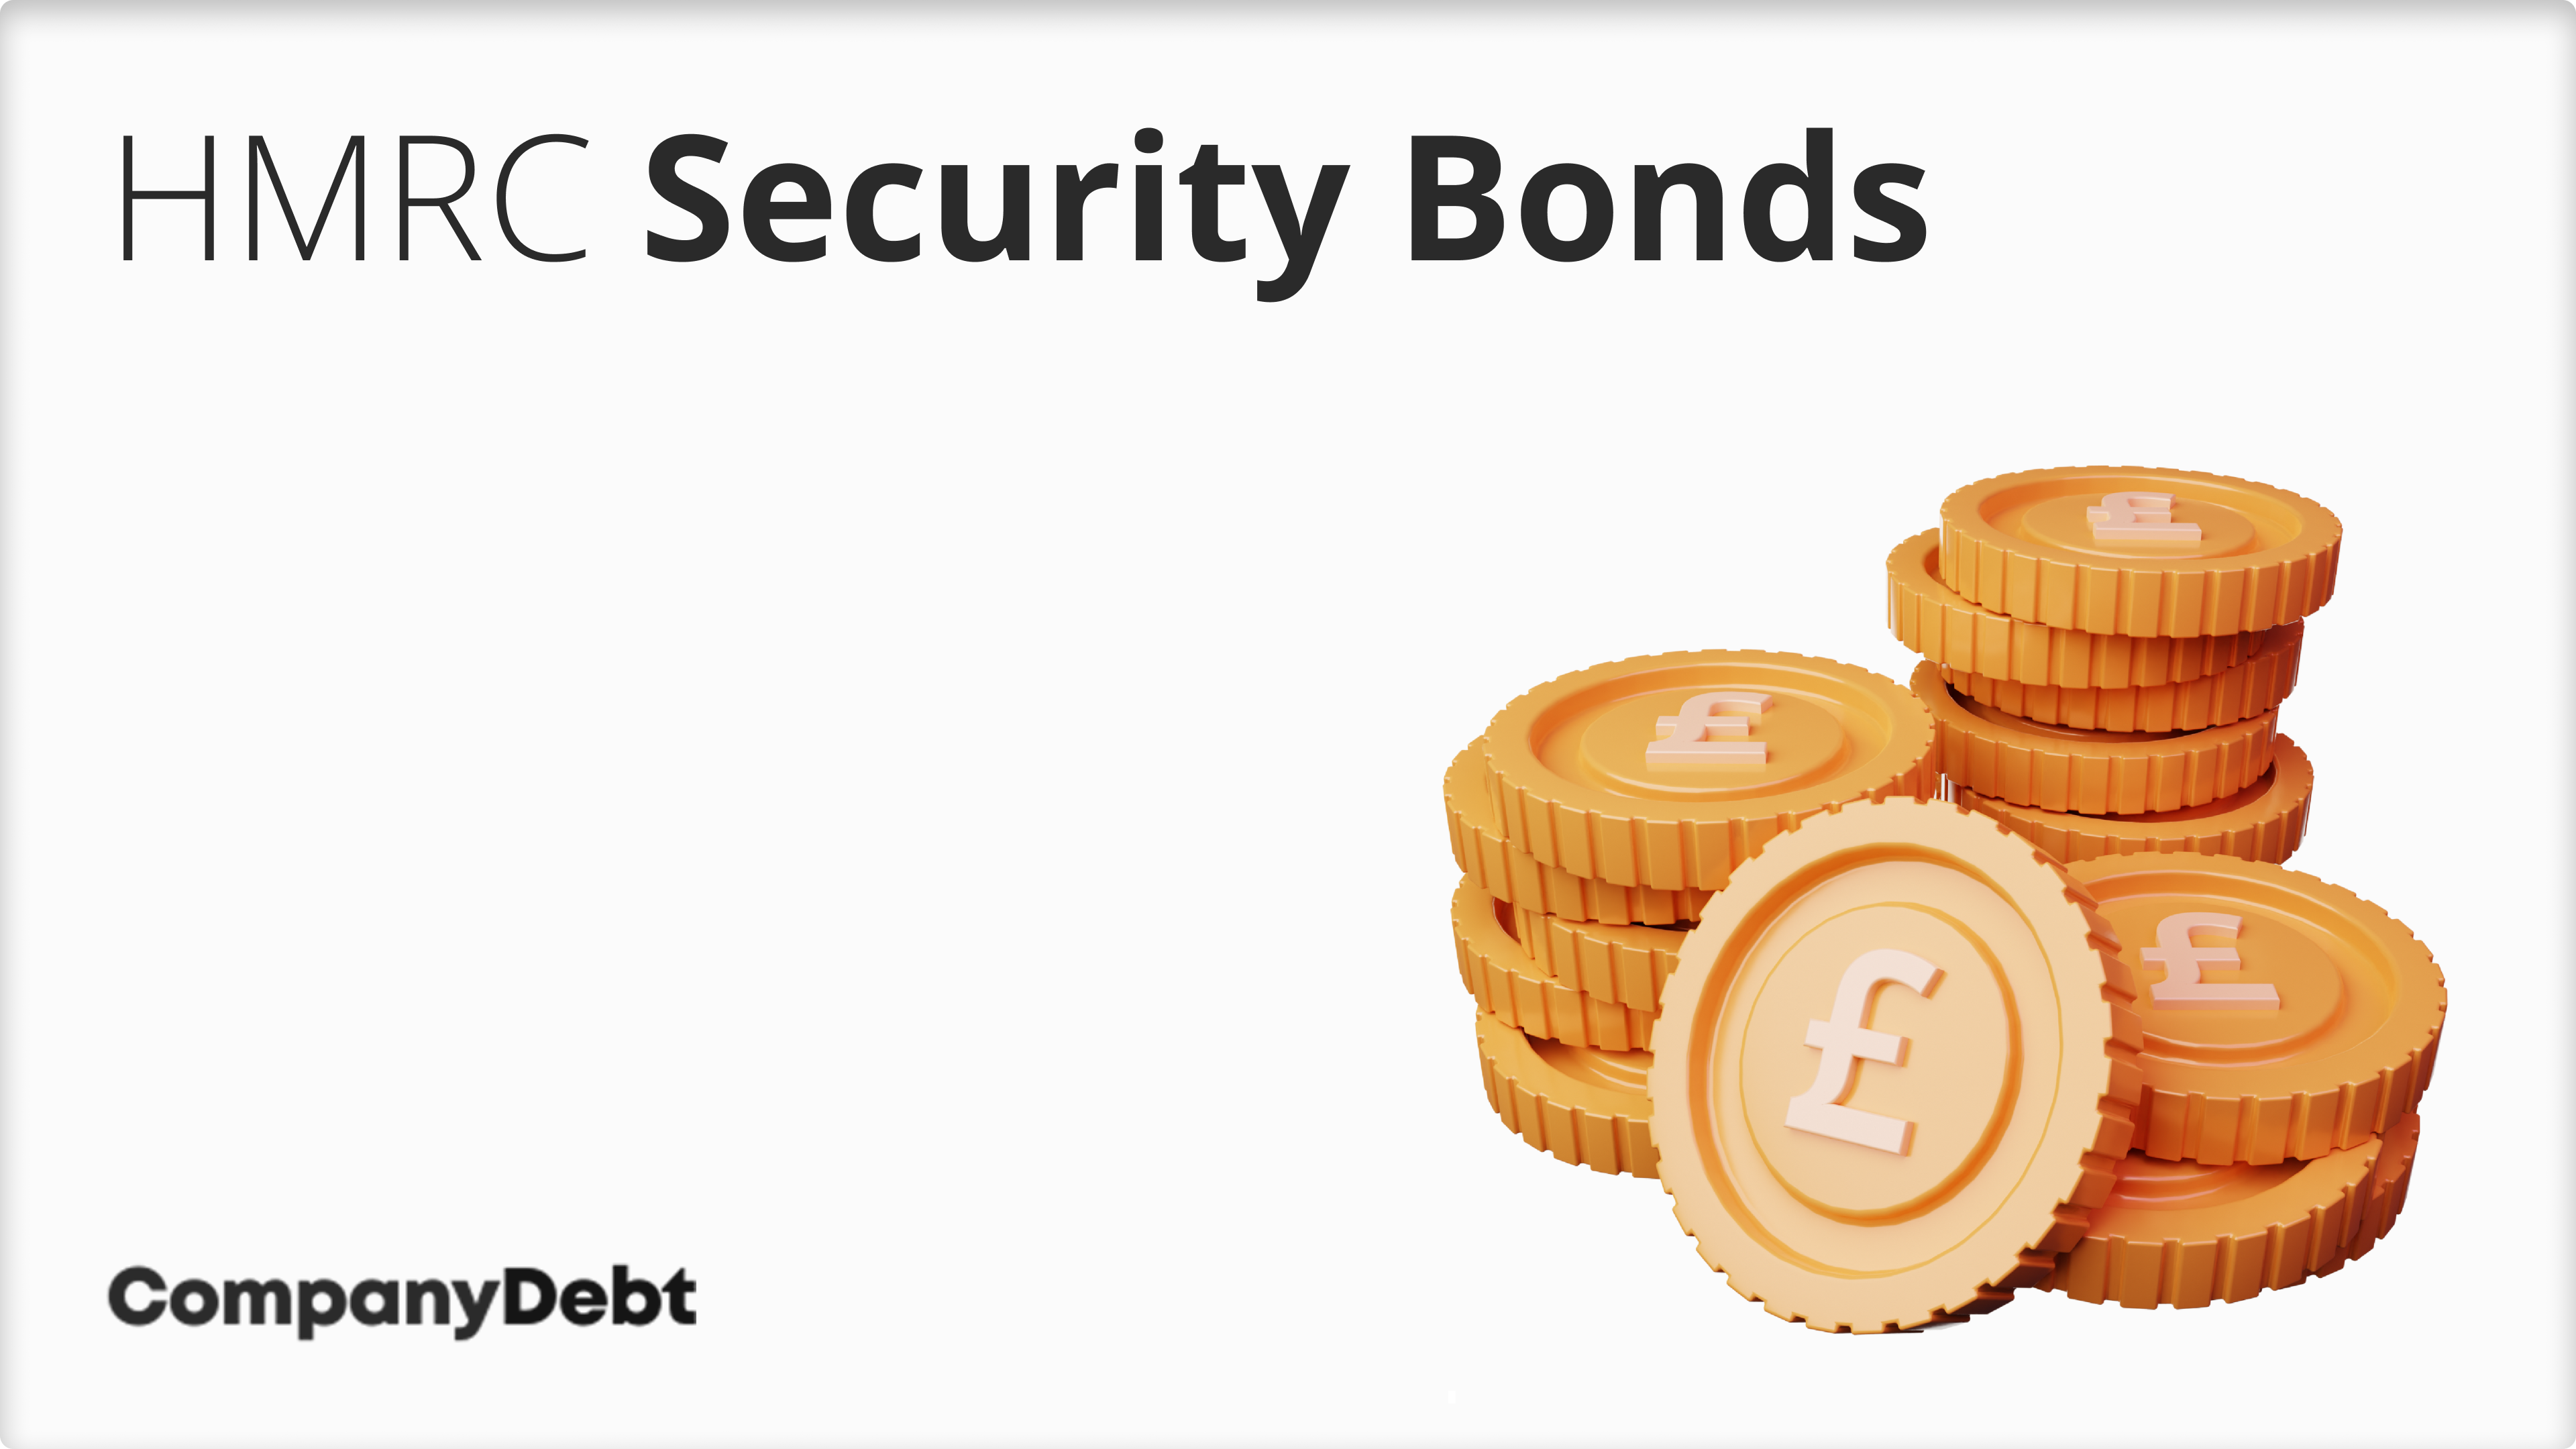 HMRC Security Bonds: What do Directors Need to Know?